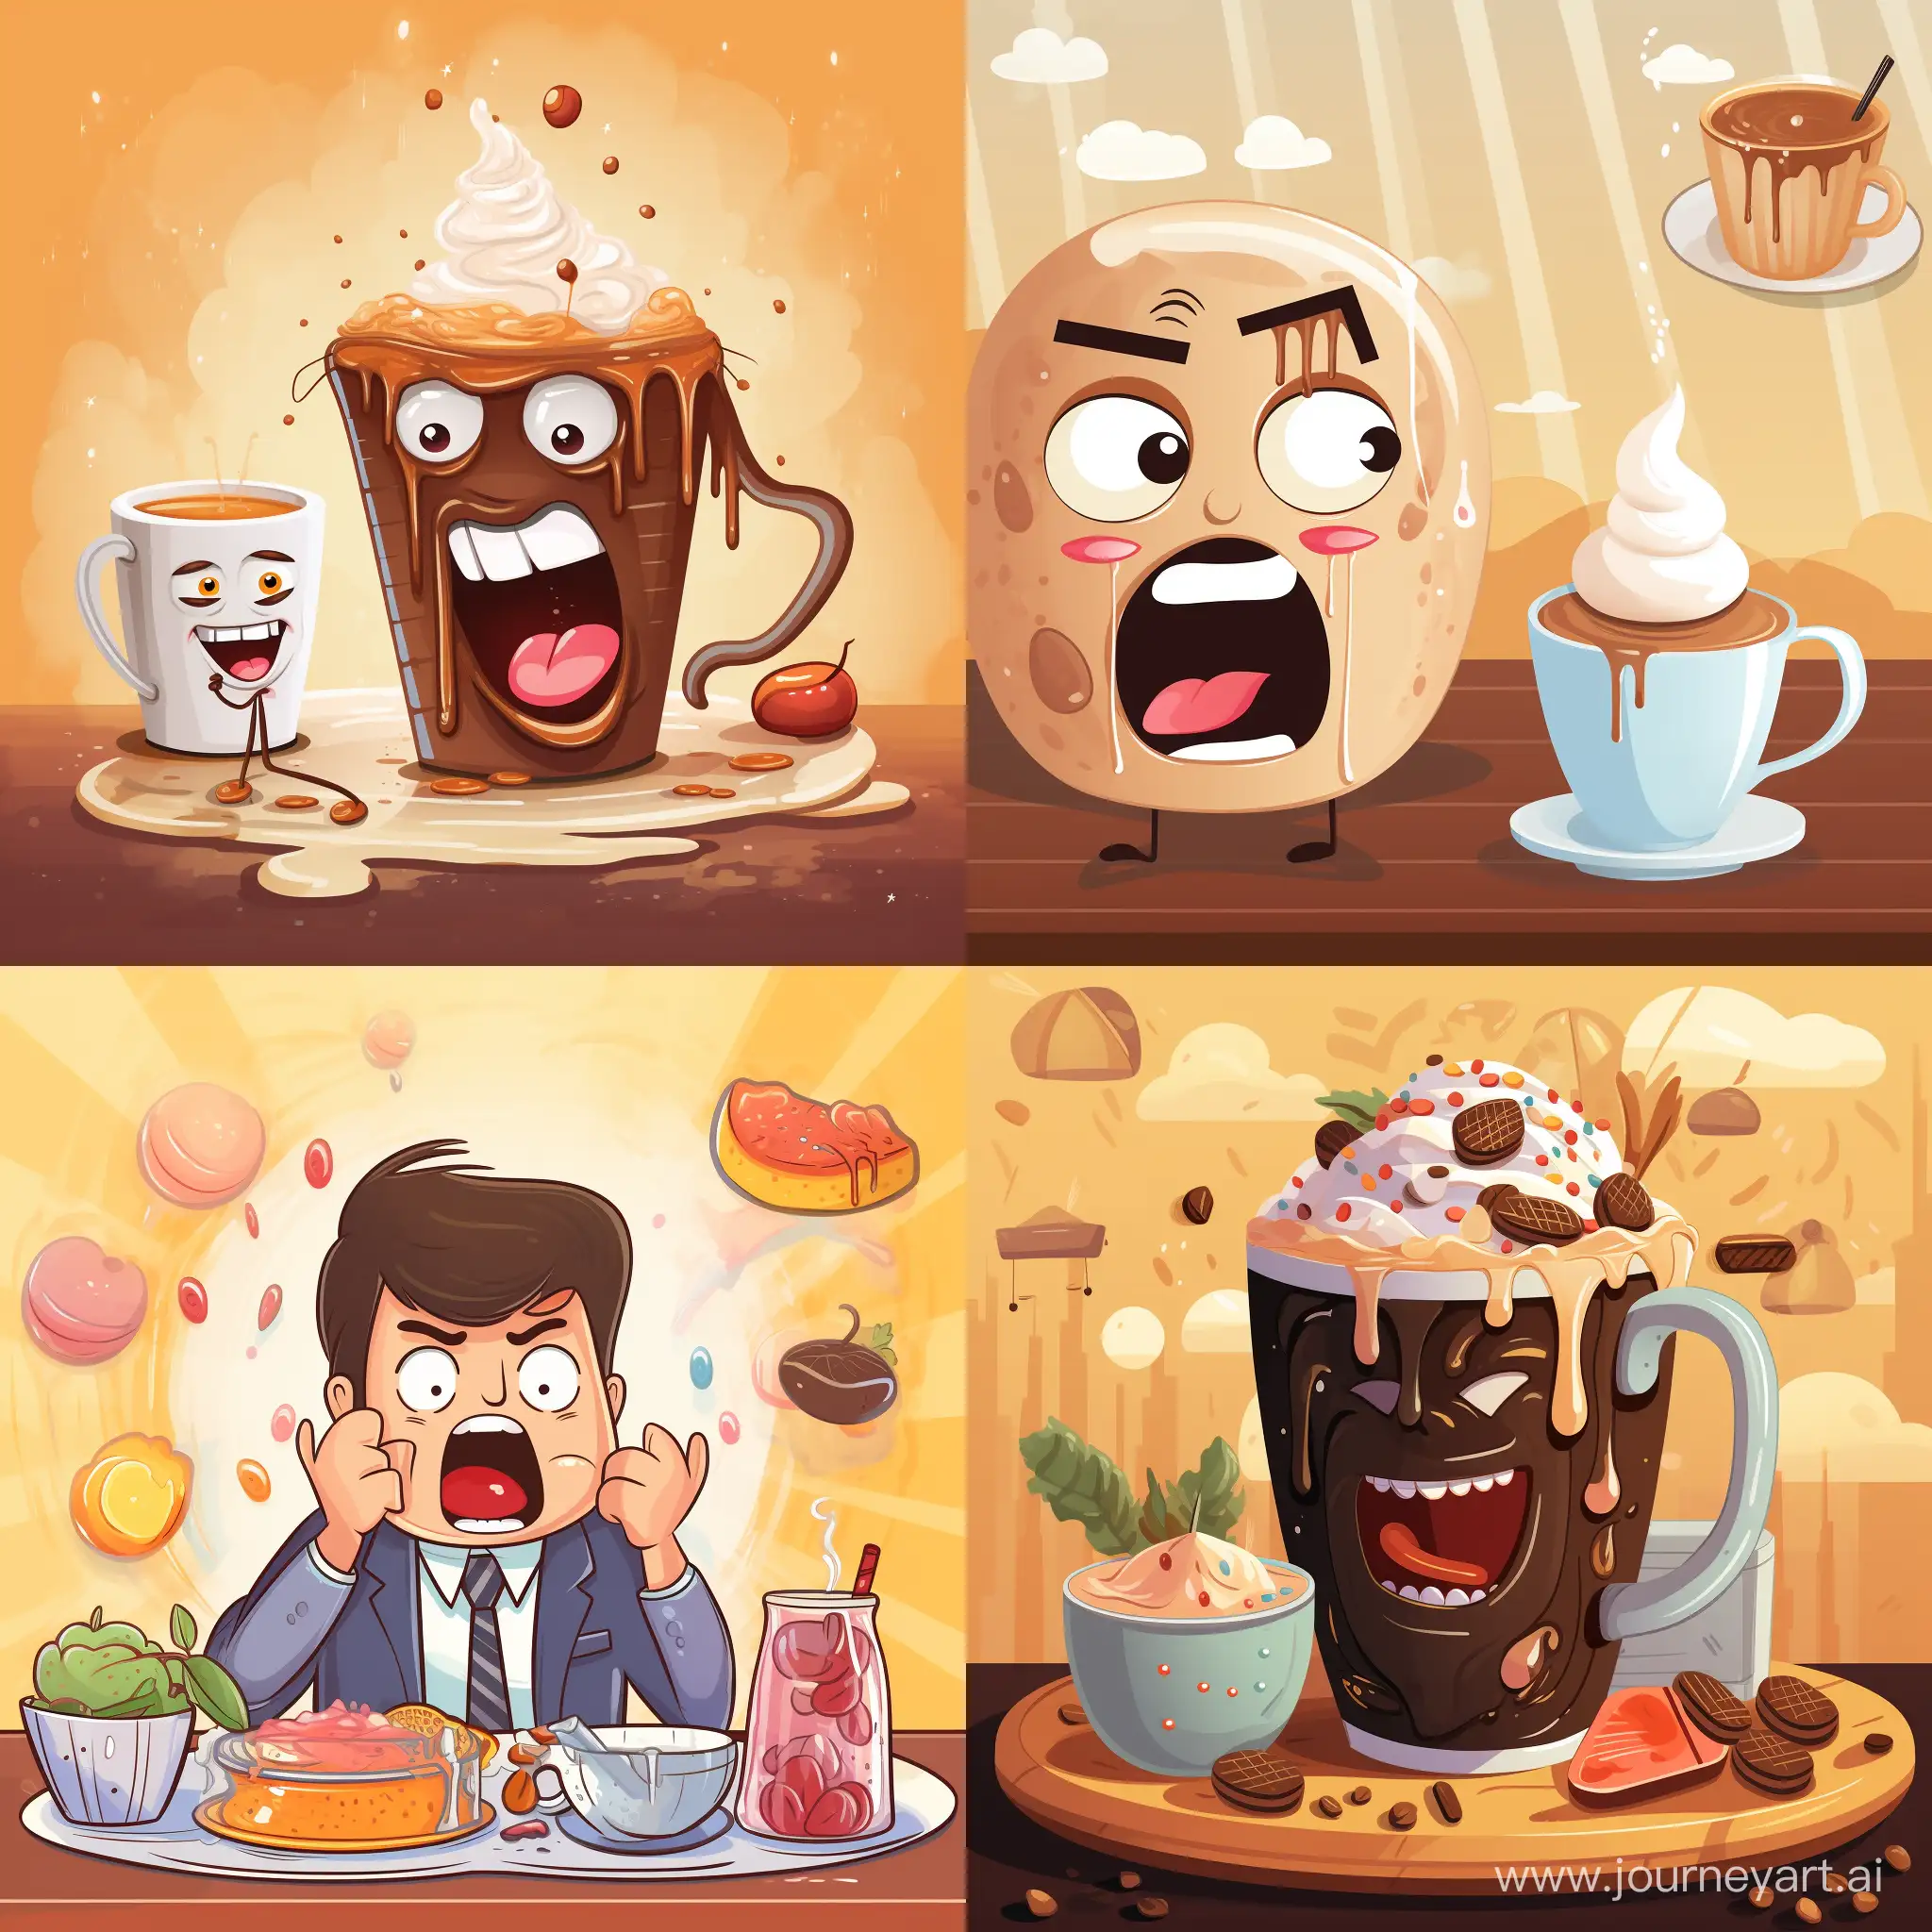 A person who experiences dental discomfort around foods and drinks that irritate the teeth, such as hot coffee, cold ice cream, or sour fruit